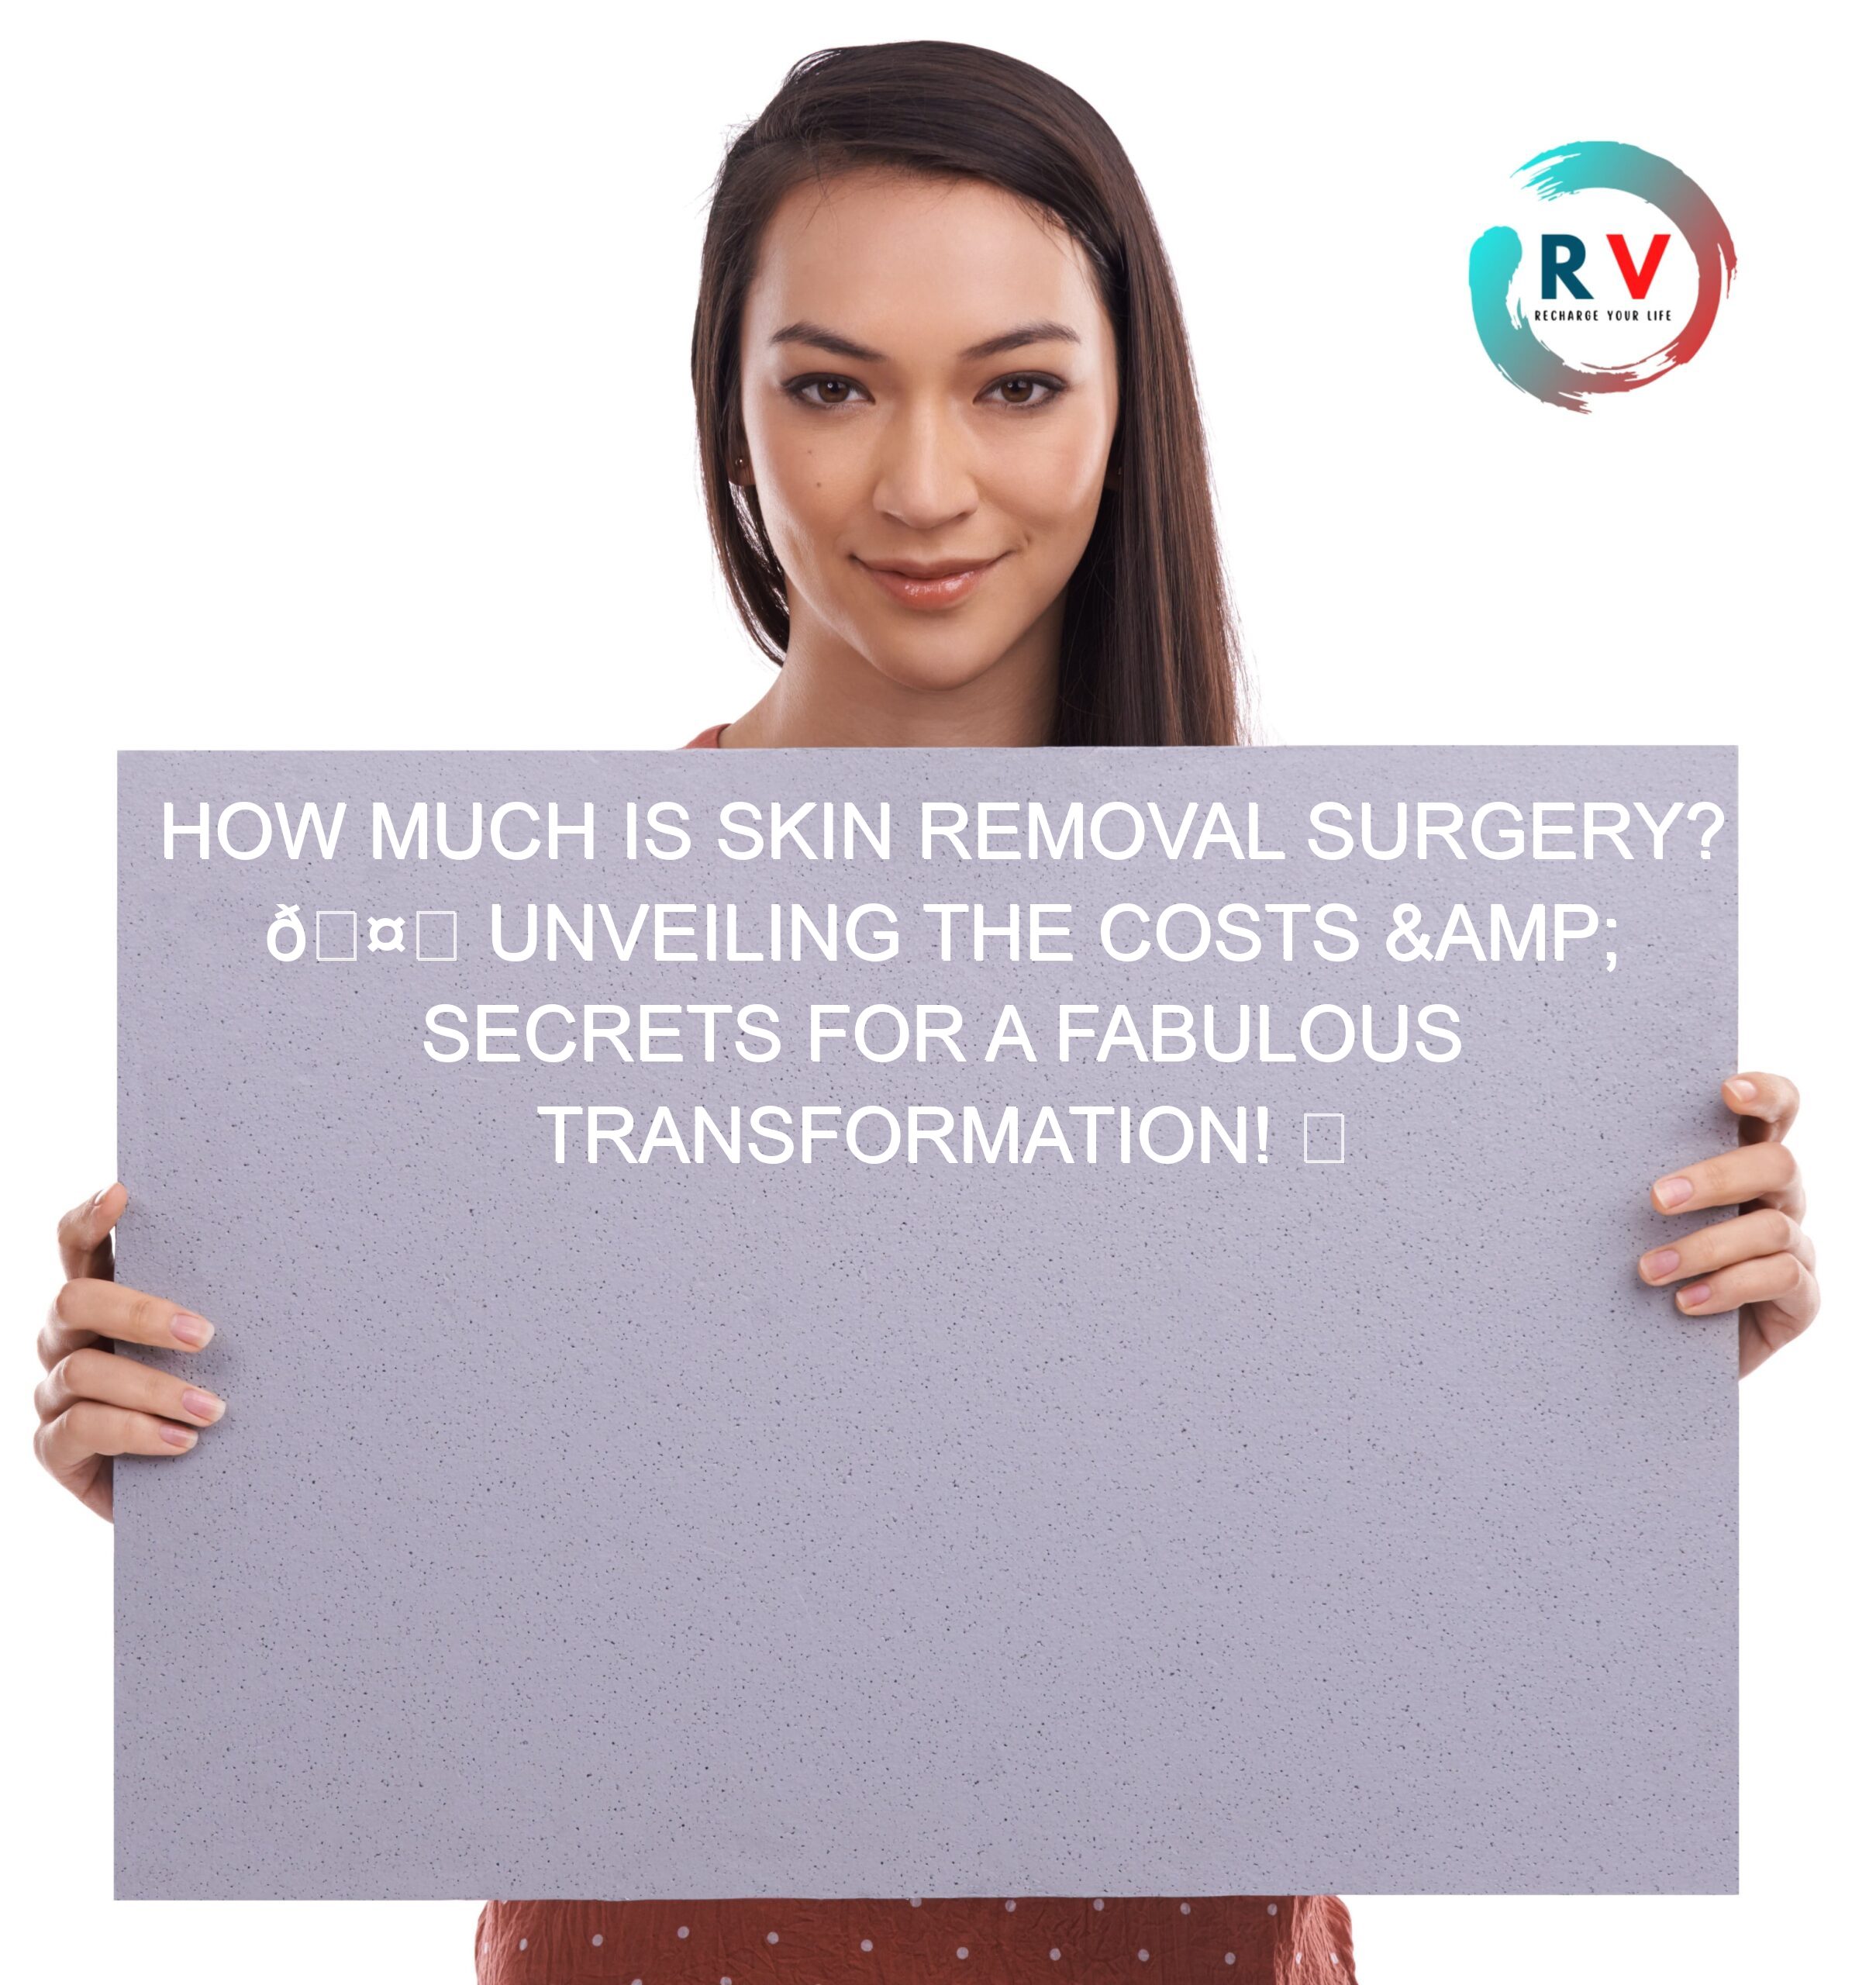 How Much is Skin Removal Surgery? Unveiling the Costs & Secrets for a Fabulous Transformation! ✨